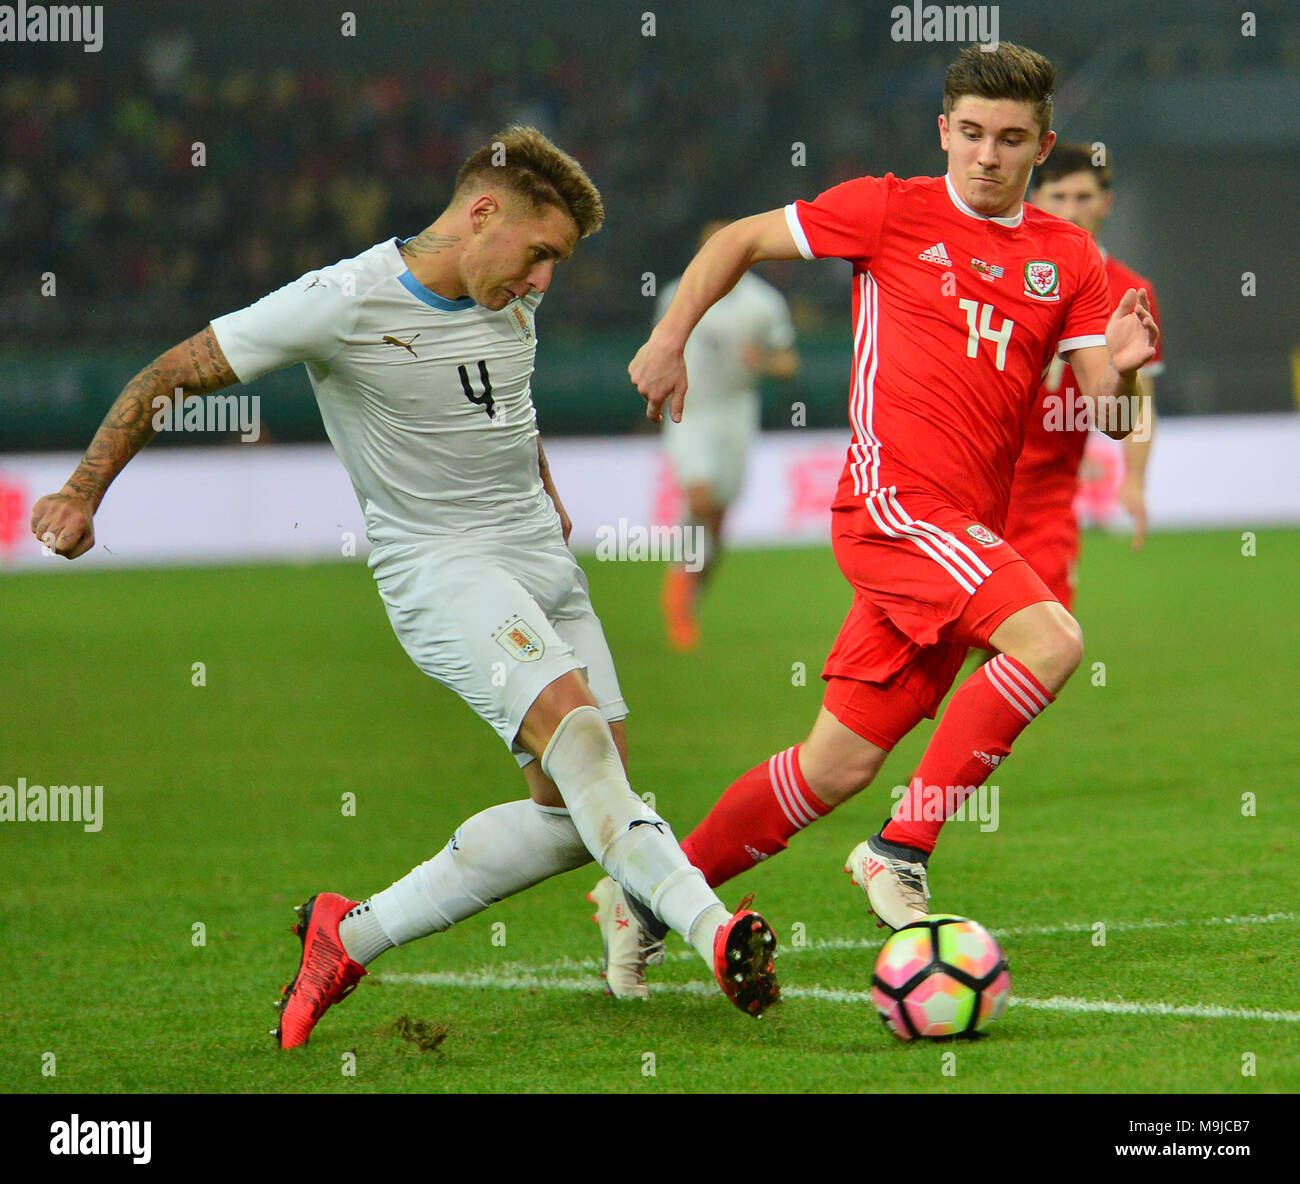 Nanning, China's Guangxi Zhuang Autonomous Region. 26th Mar, 2018. Declan John (R) of Wales vies with Guillermo Varela of Uruguay during the final match between Wales and Uruguay at the 2018 China Cup International Football Championship in Nanning, capital of south China's Guangxi Zhuang Autonomous Region, March 26, 2018. Uruguay won the final by 1-0 against Wales and claimed the title of the event. Credit: Li Xuanli/Xinhua/Alamy Live News Stock Photo